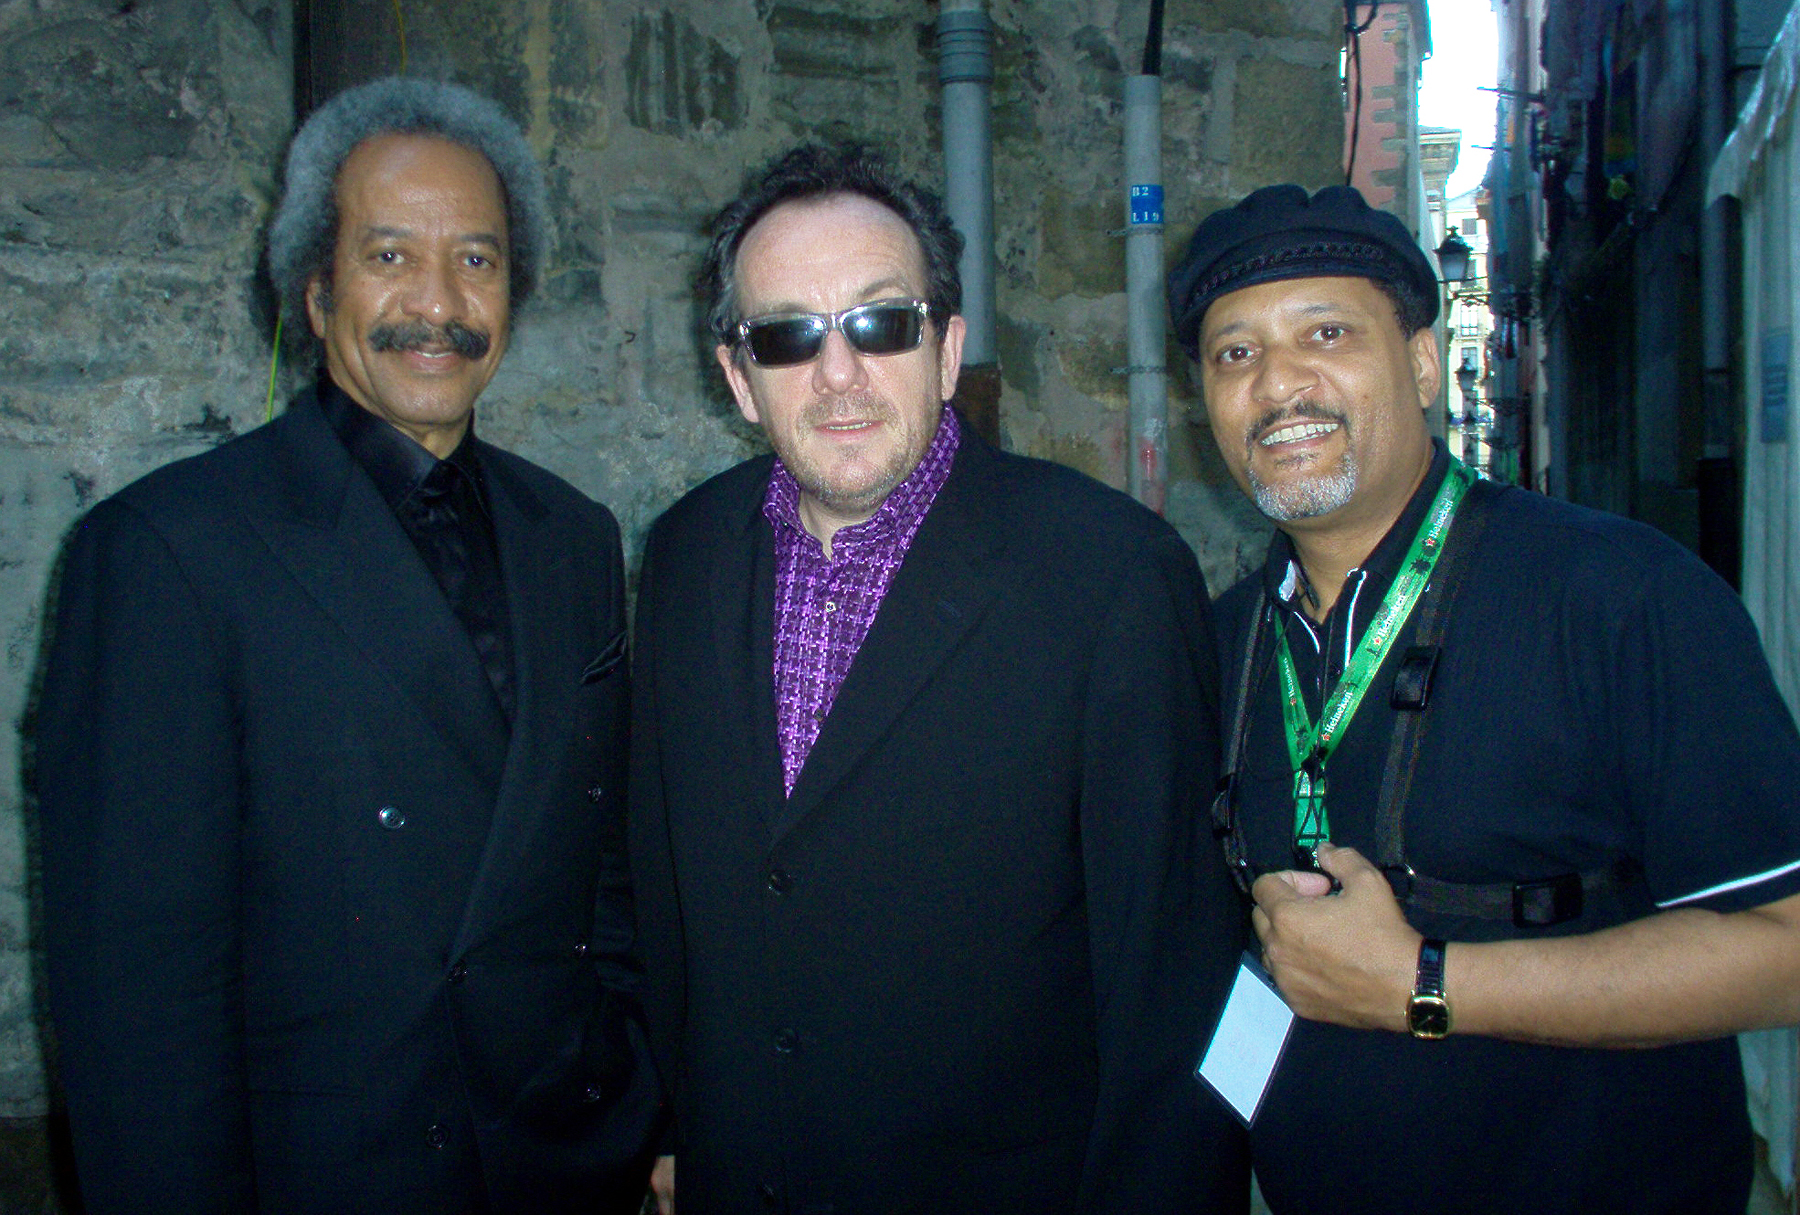 Brian Breeze Cayolle with Allen Toussaint and Elvis Costello